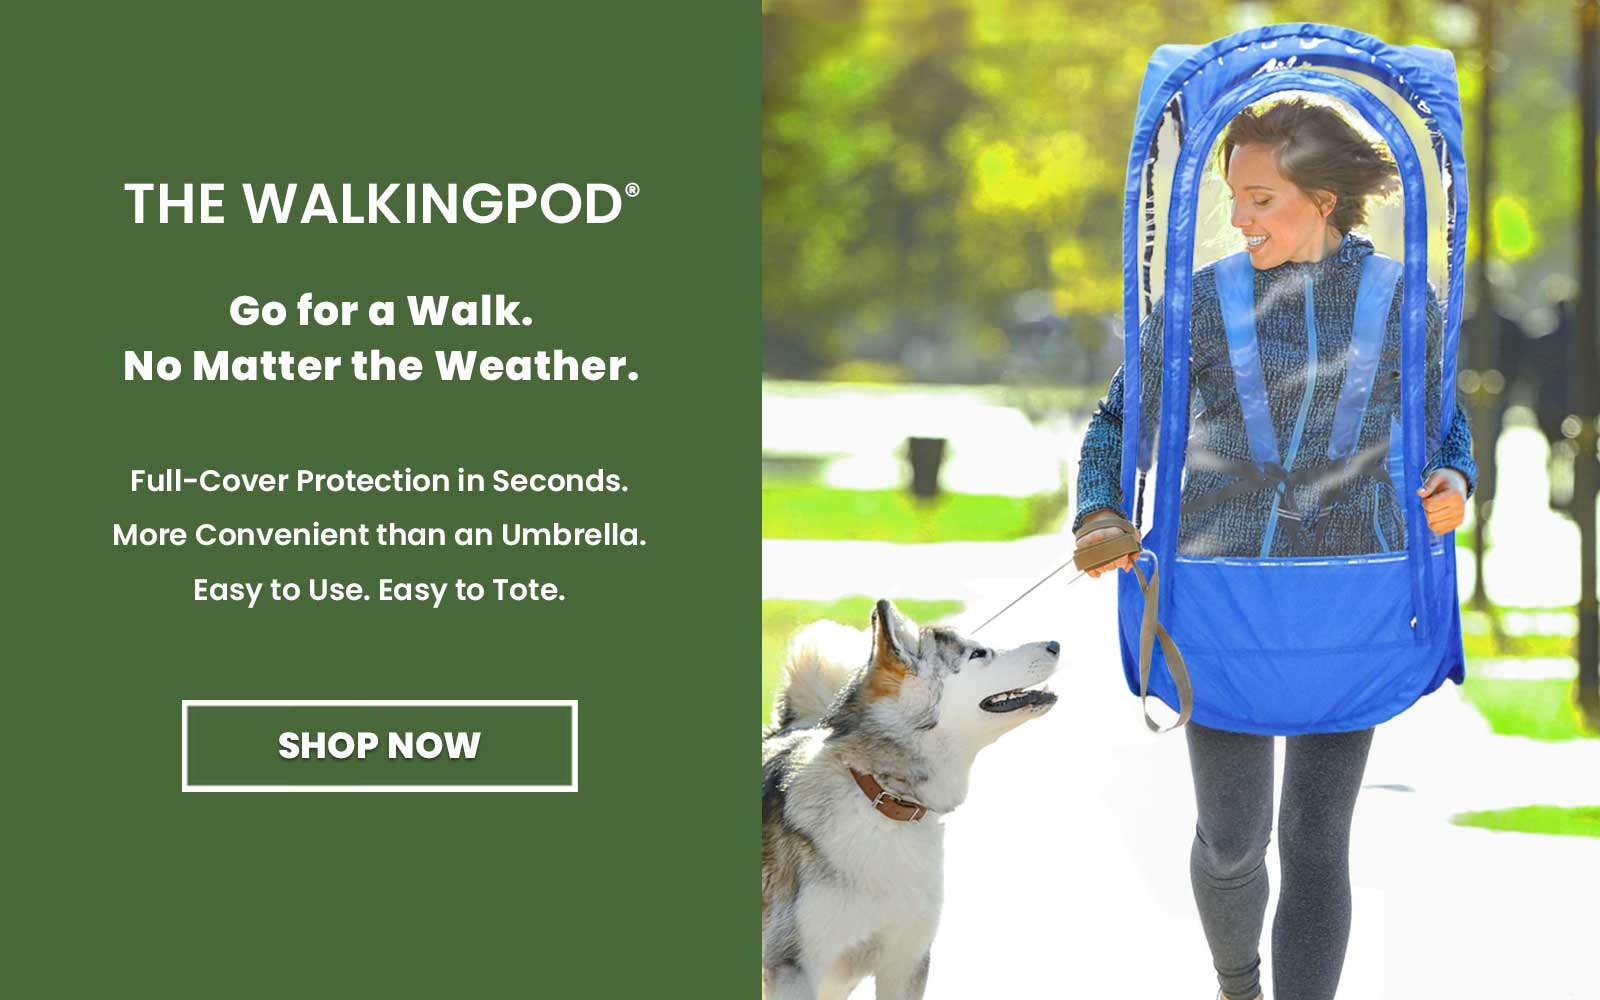 WalkingPods are great for hassle-free, portable cover that pops open in seconds. Great for walks, outdoor chores and more.